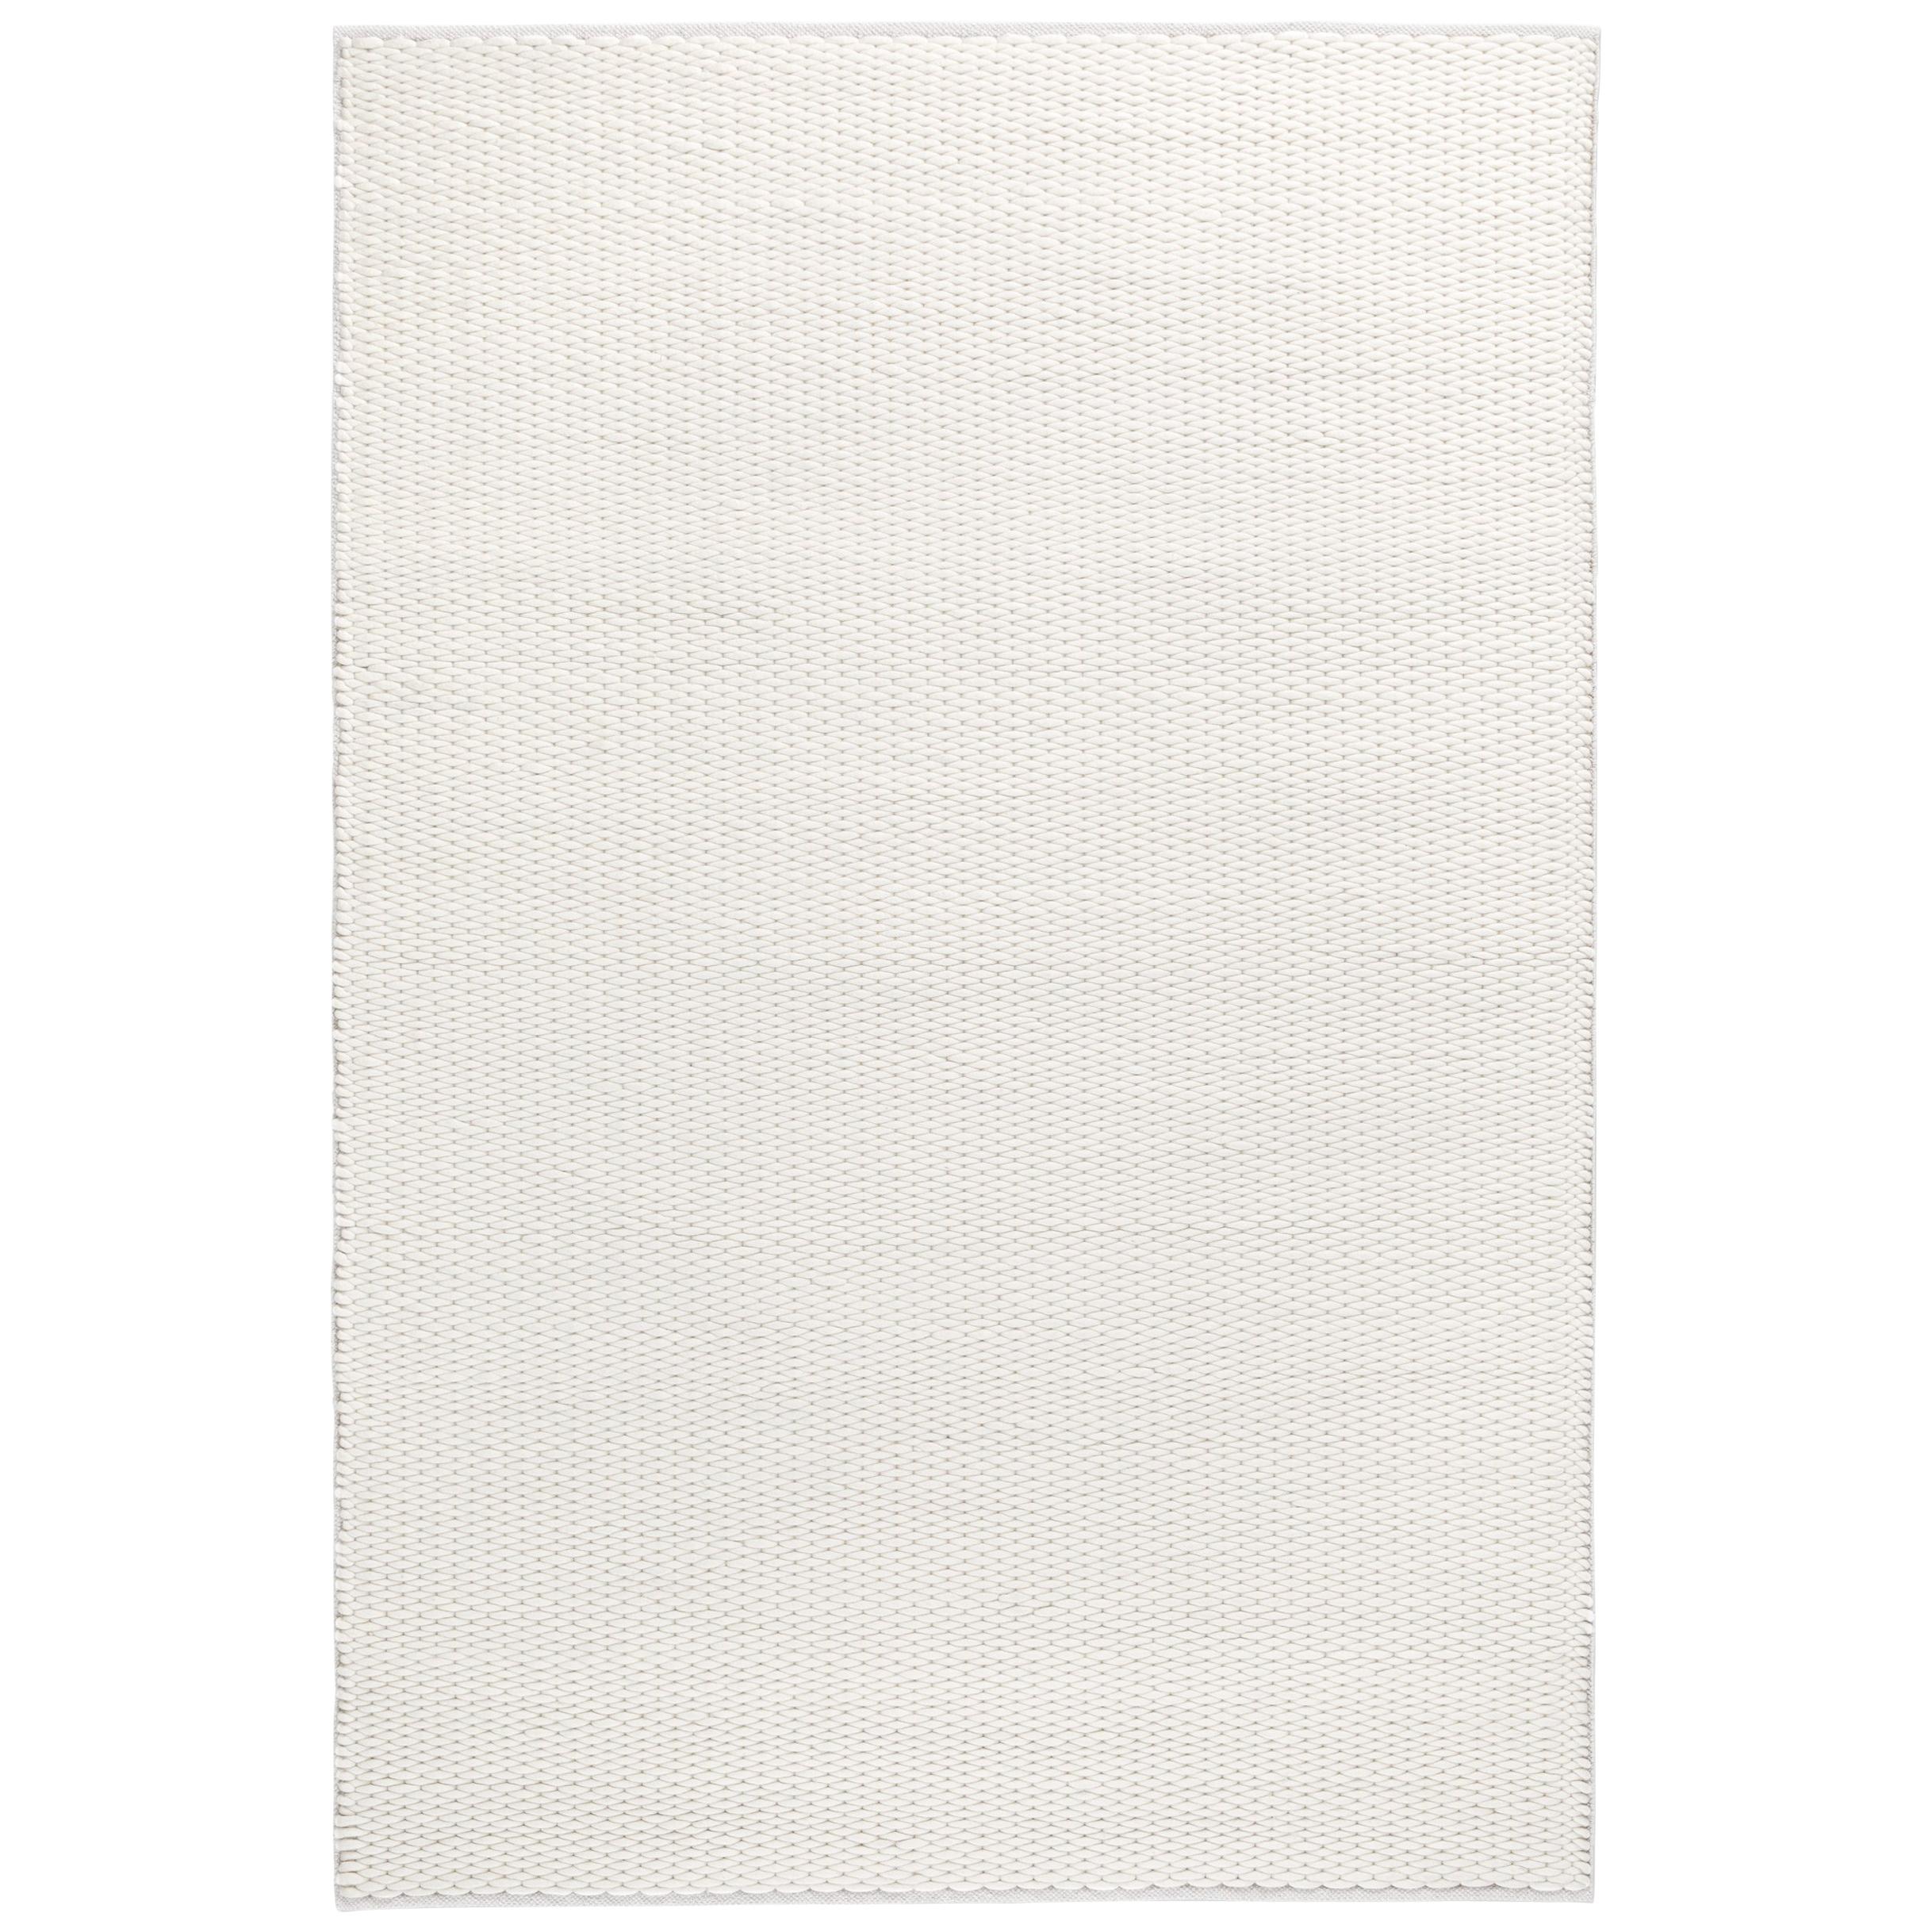 Dunes Cream Thick Weave Rug For Sale